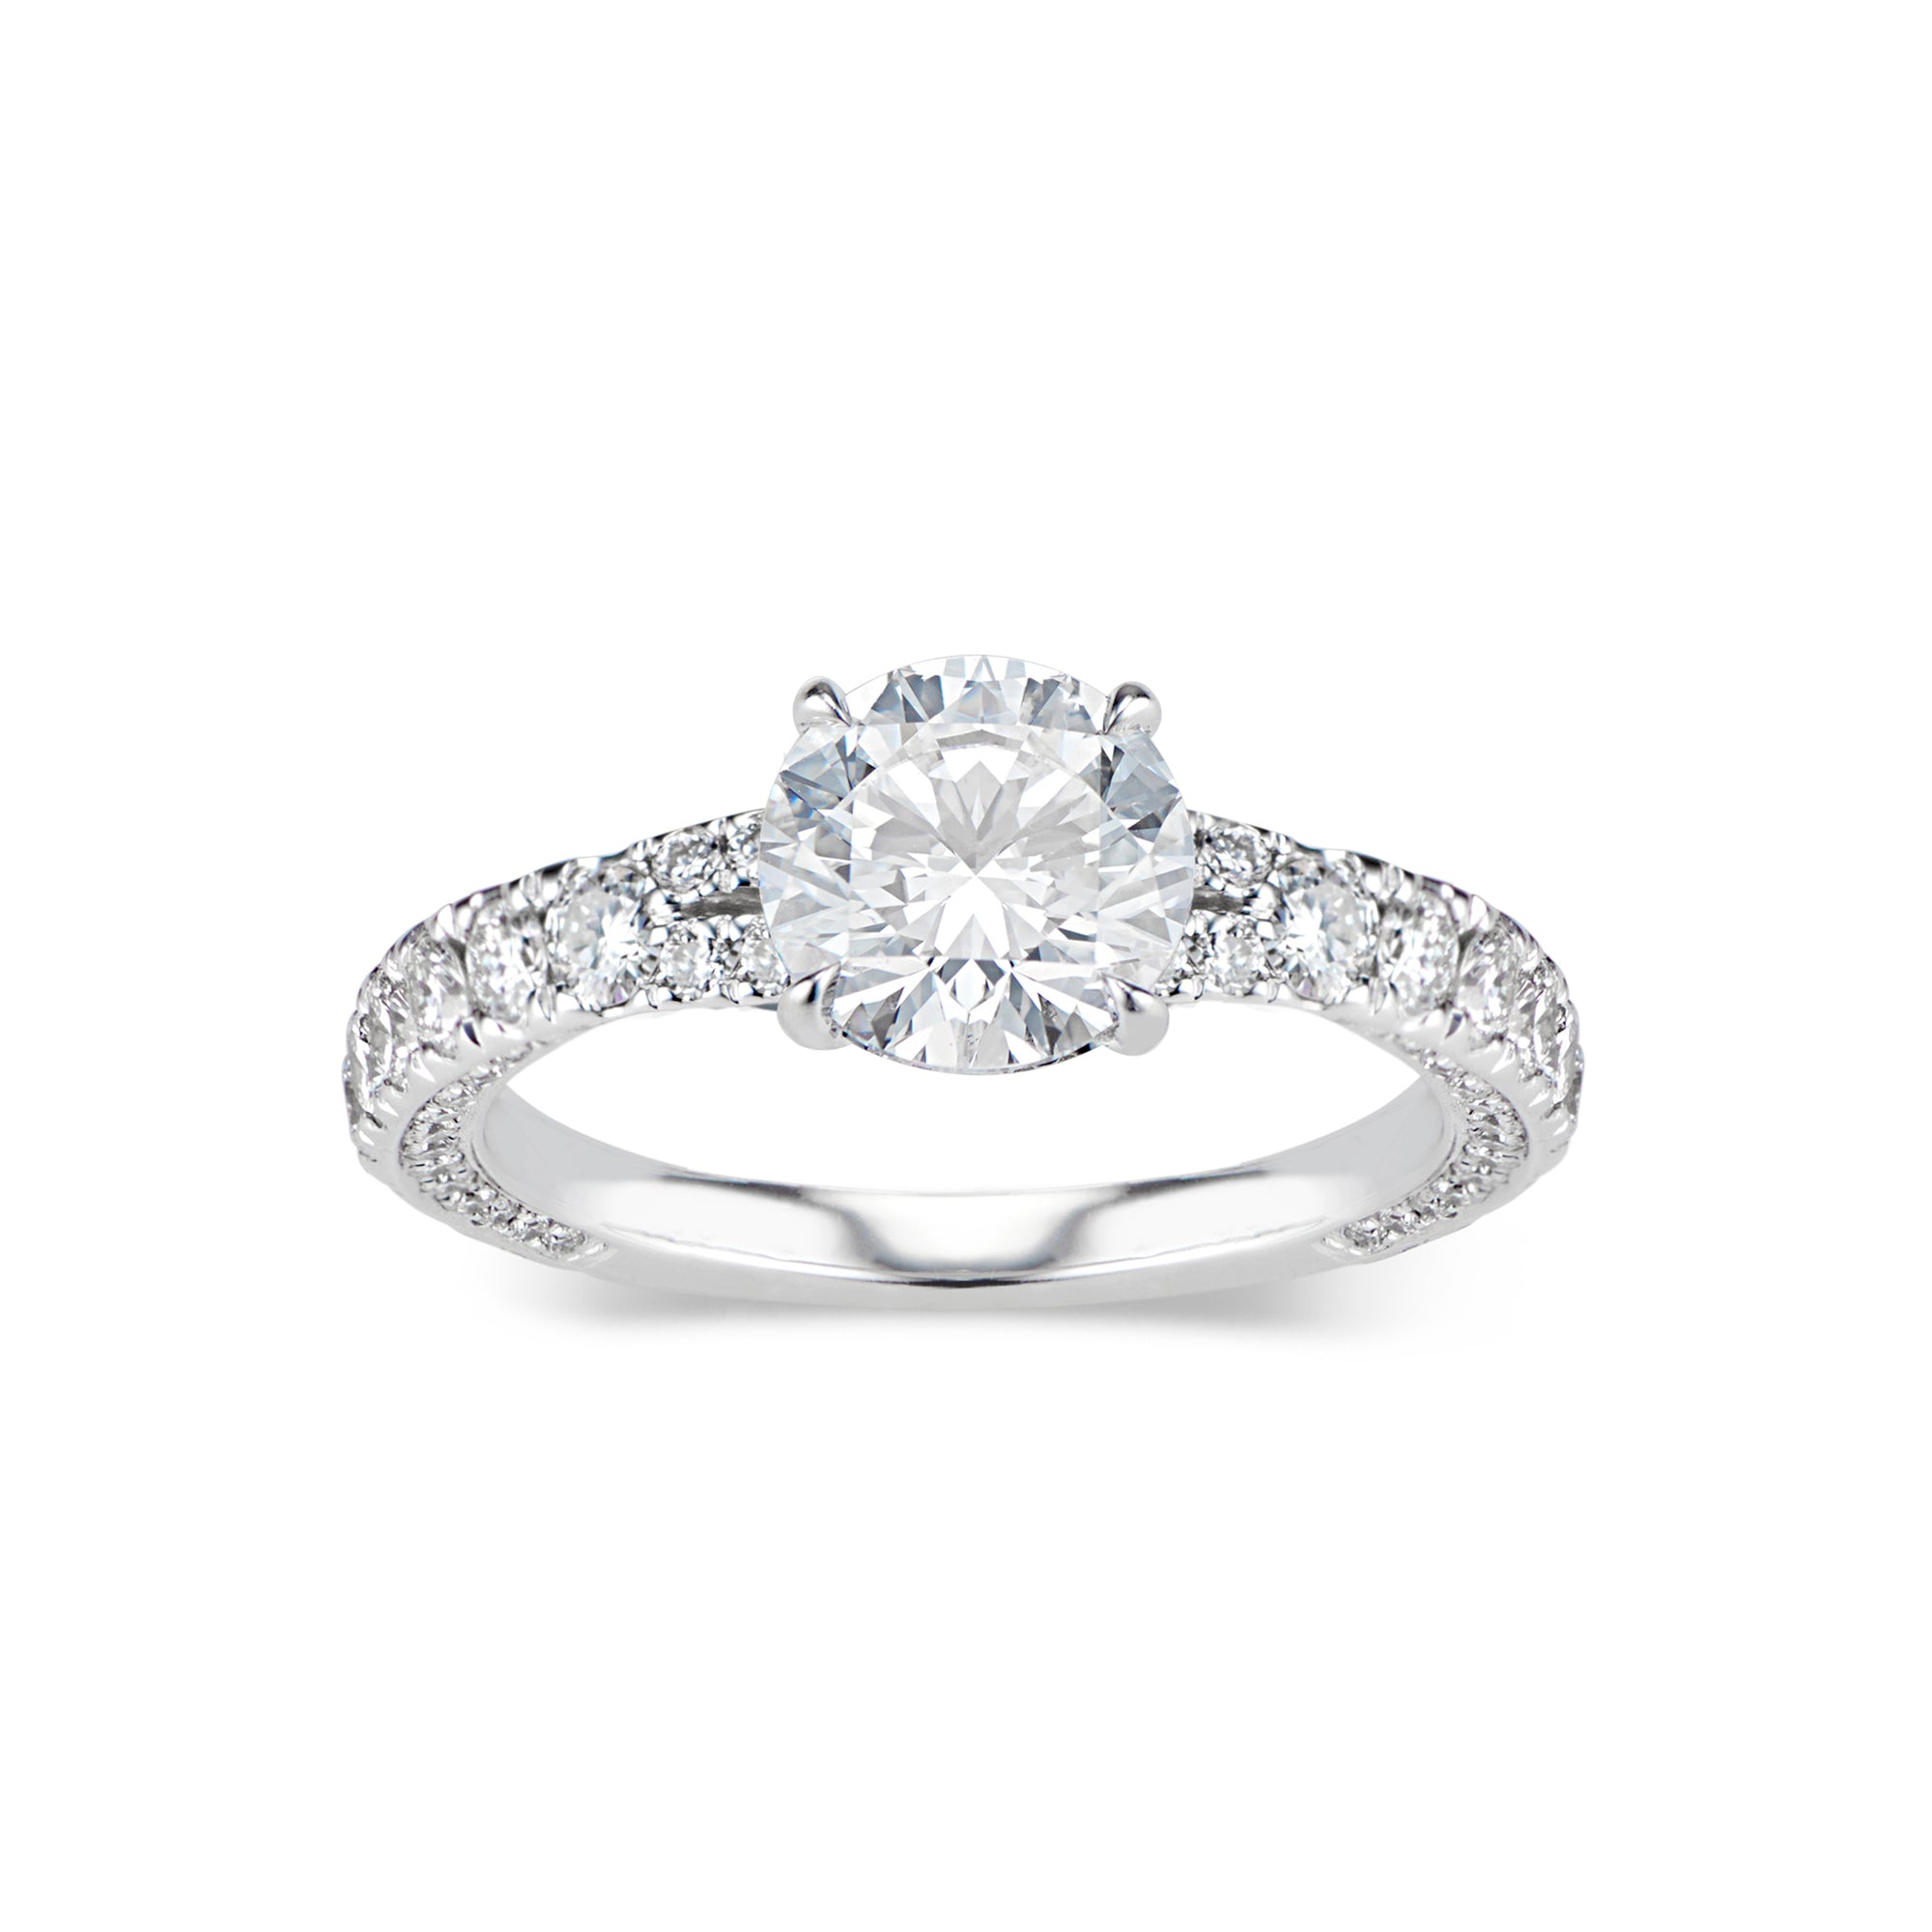 Round Diamond Engagement Ring with Bypass Shank  -18K weighting 3.22 GR  - 134 round diamonds totaling 0.99 carats